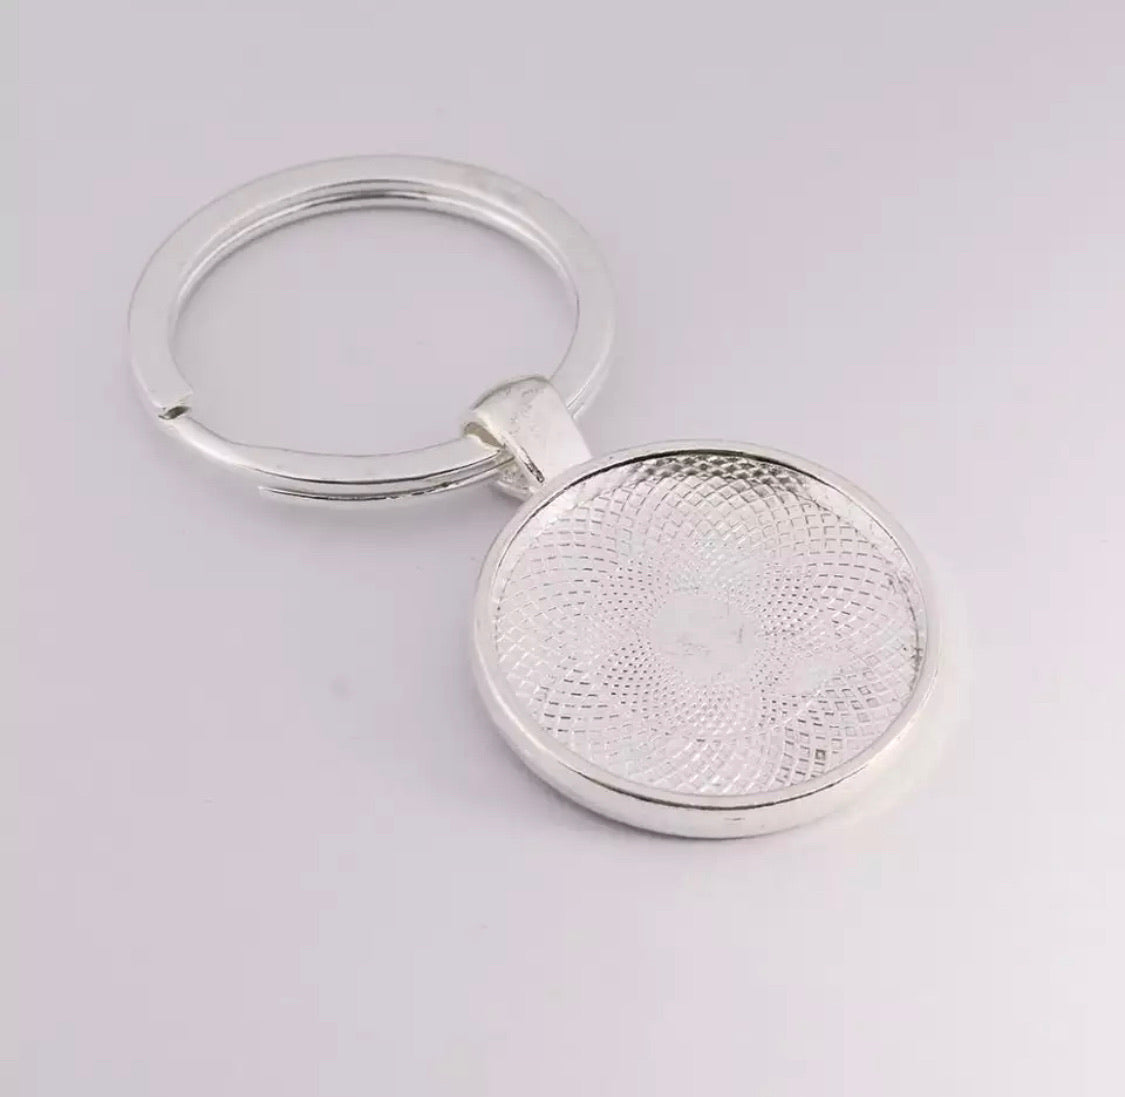 KITS 1 inch  Round Key Chain making includes Glass